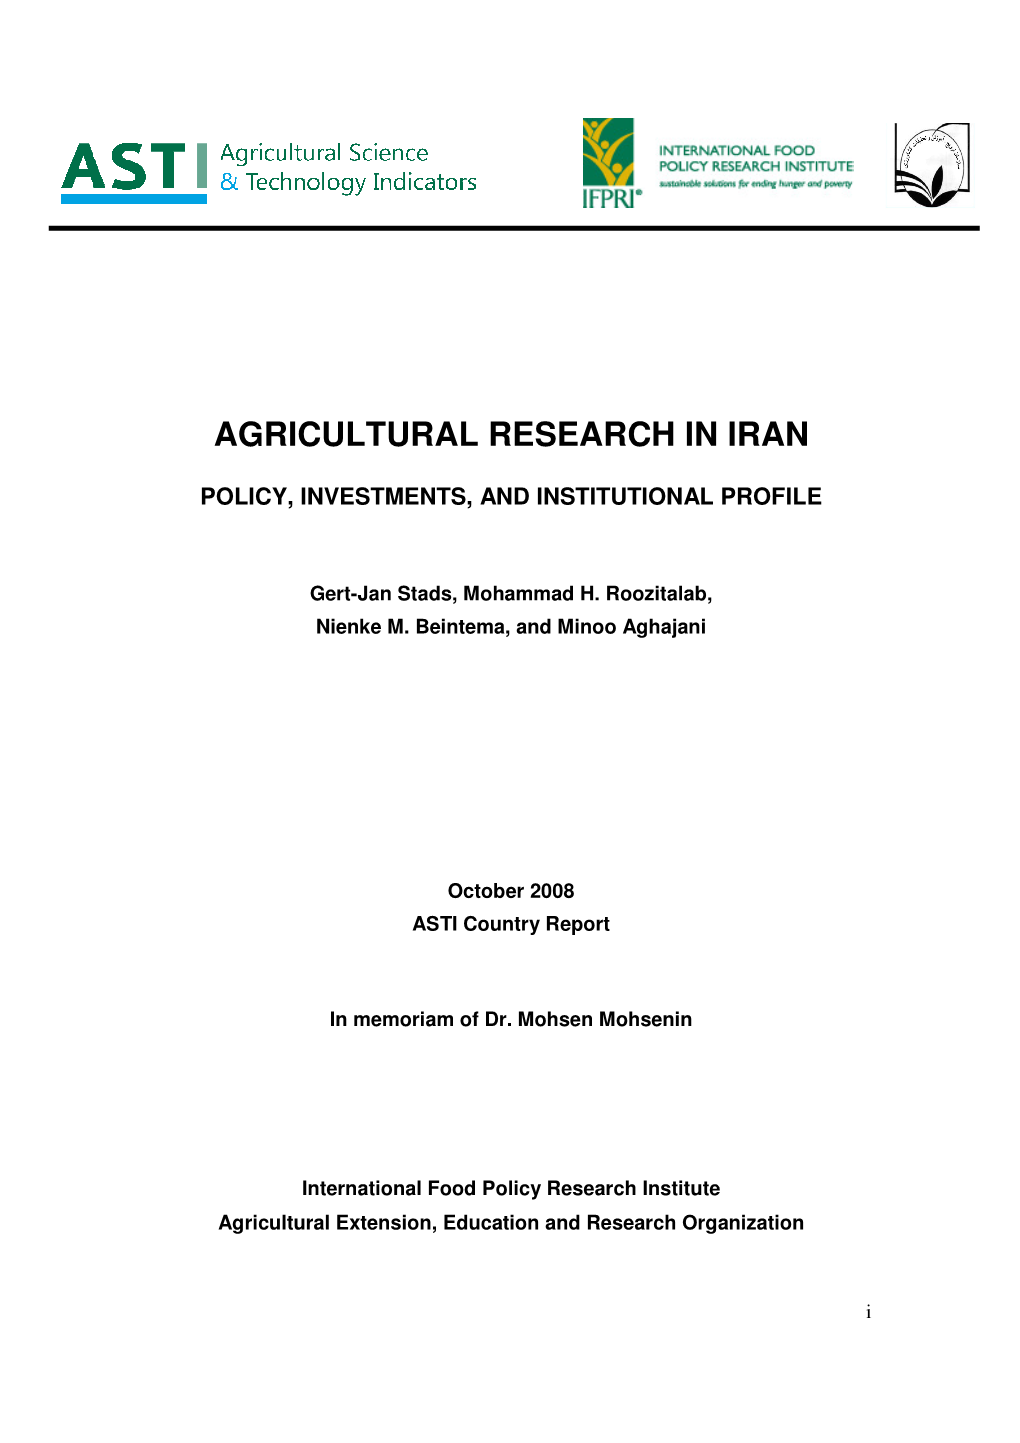 Agricultural Research in Iran